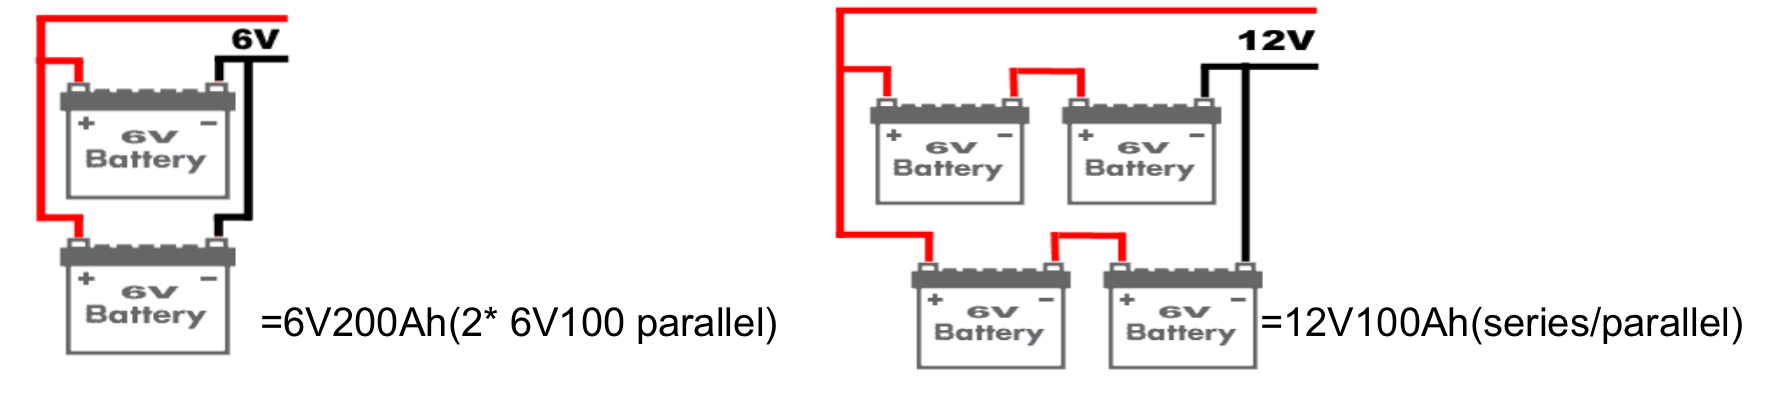 How to connect a battery in Parallel?